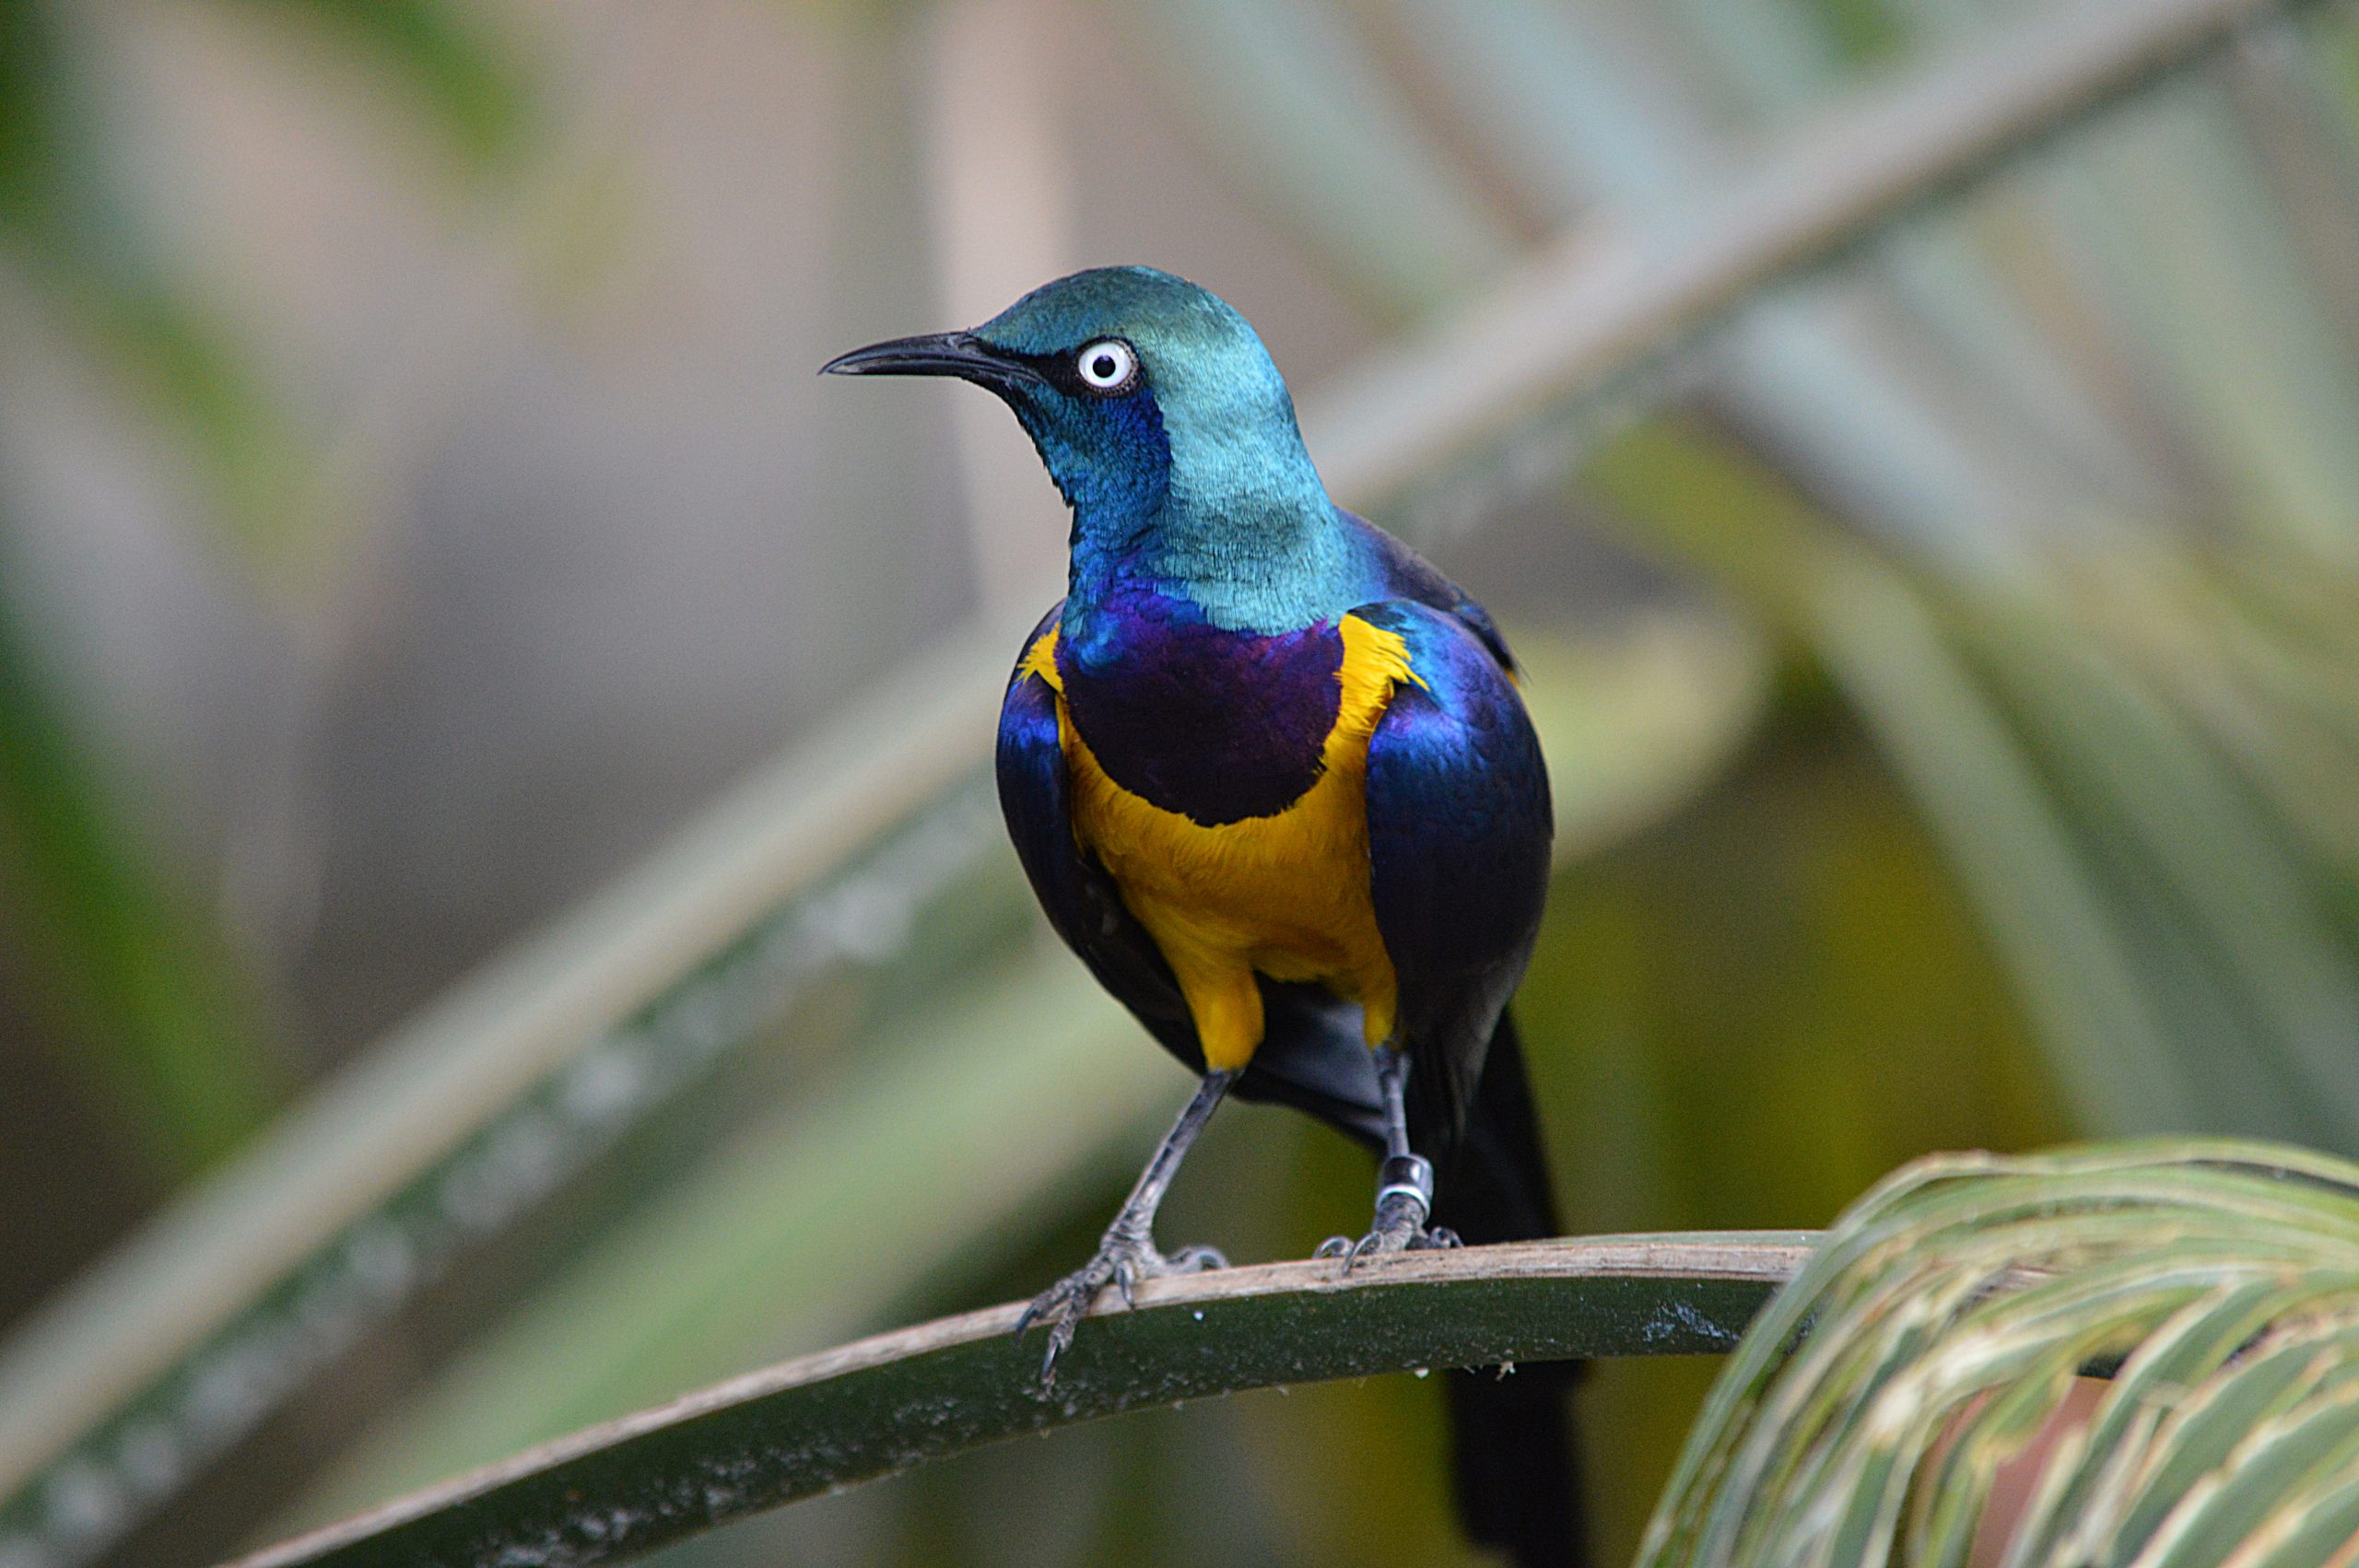 A Golden-breasted Starling perched on a branch